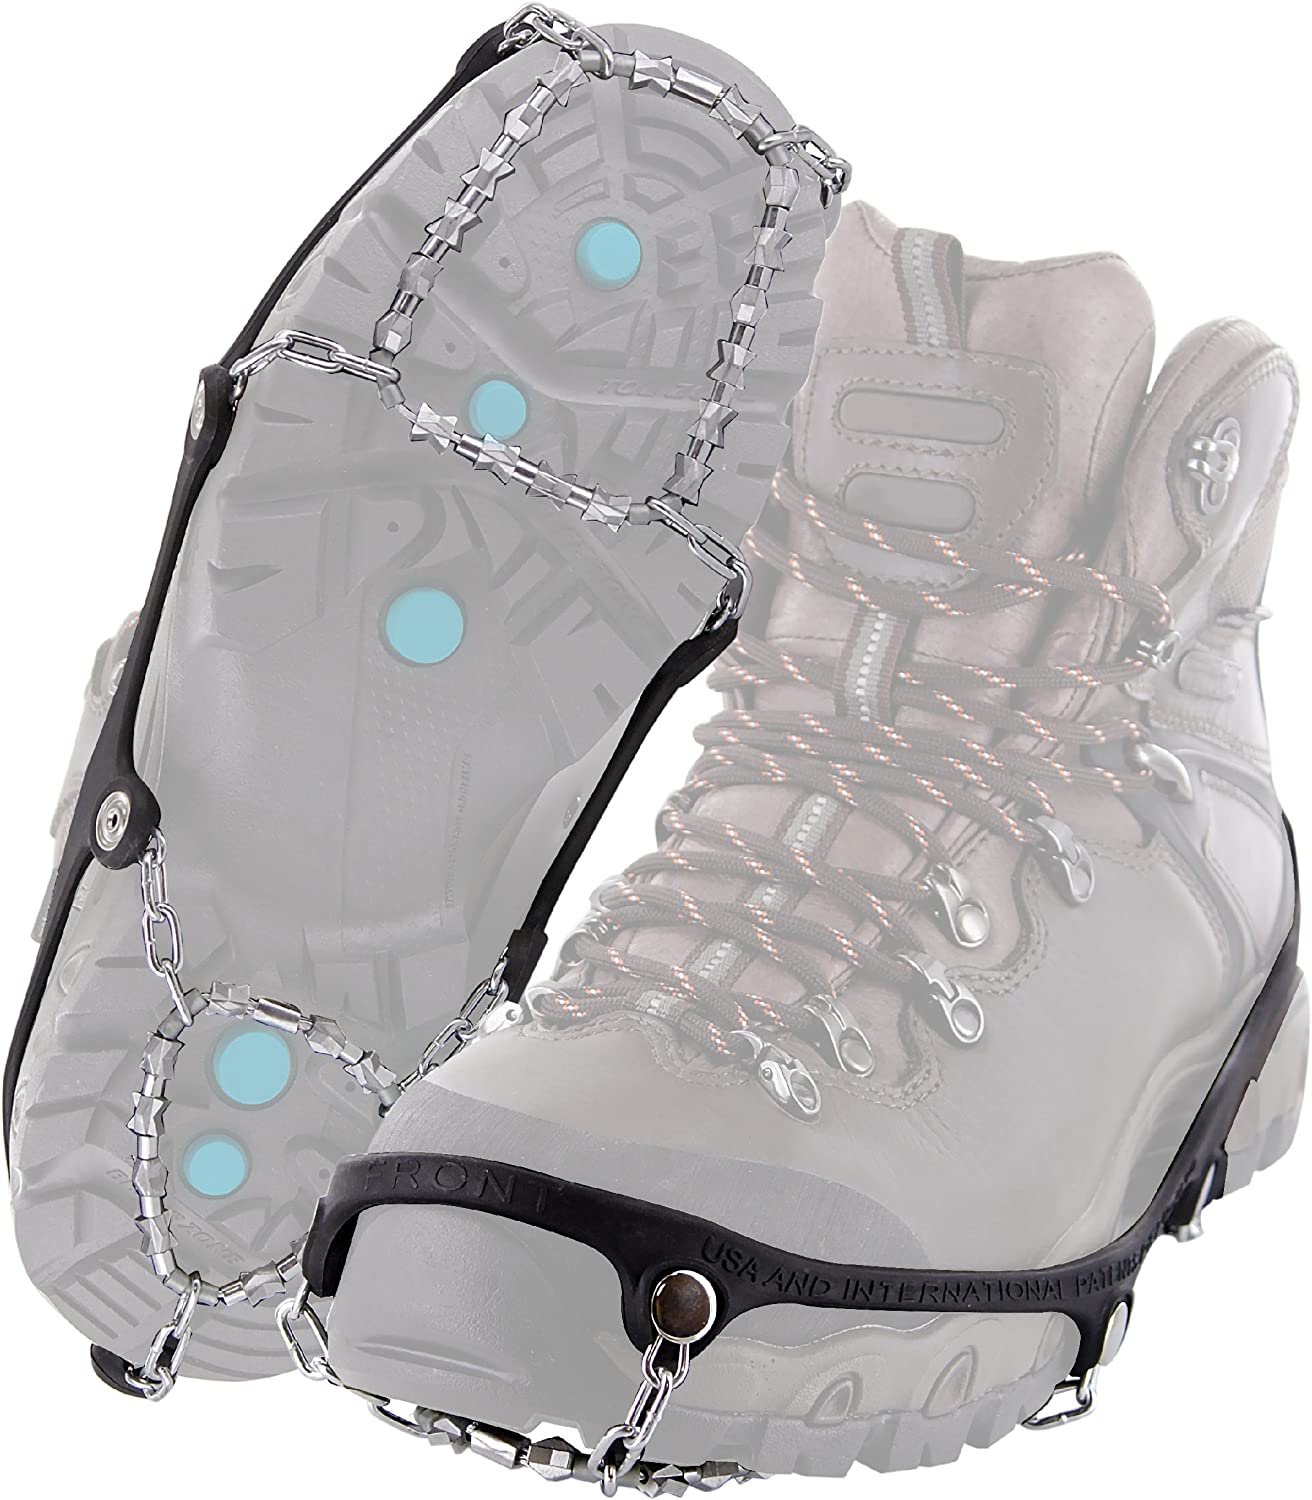 Yaktrax Diamond Grip All-Surface Traction Cleats for [...]